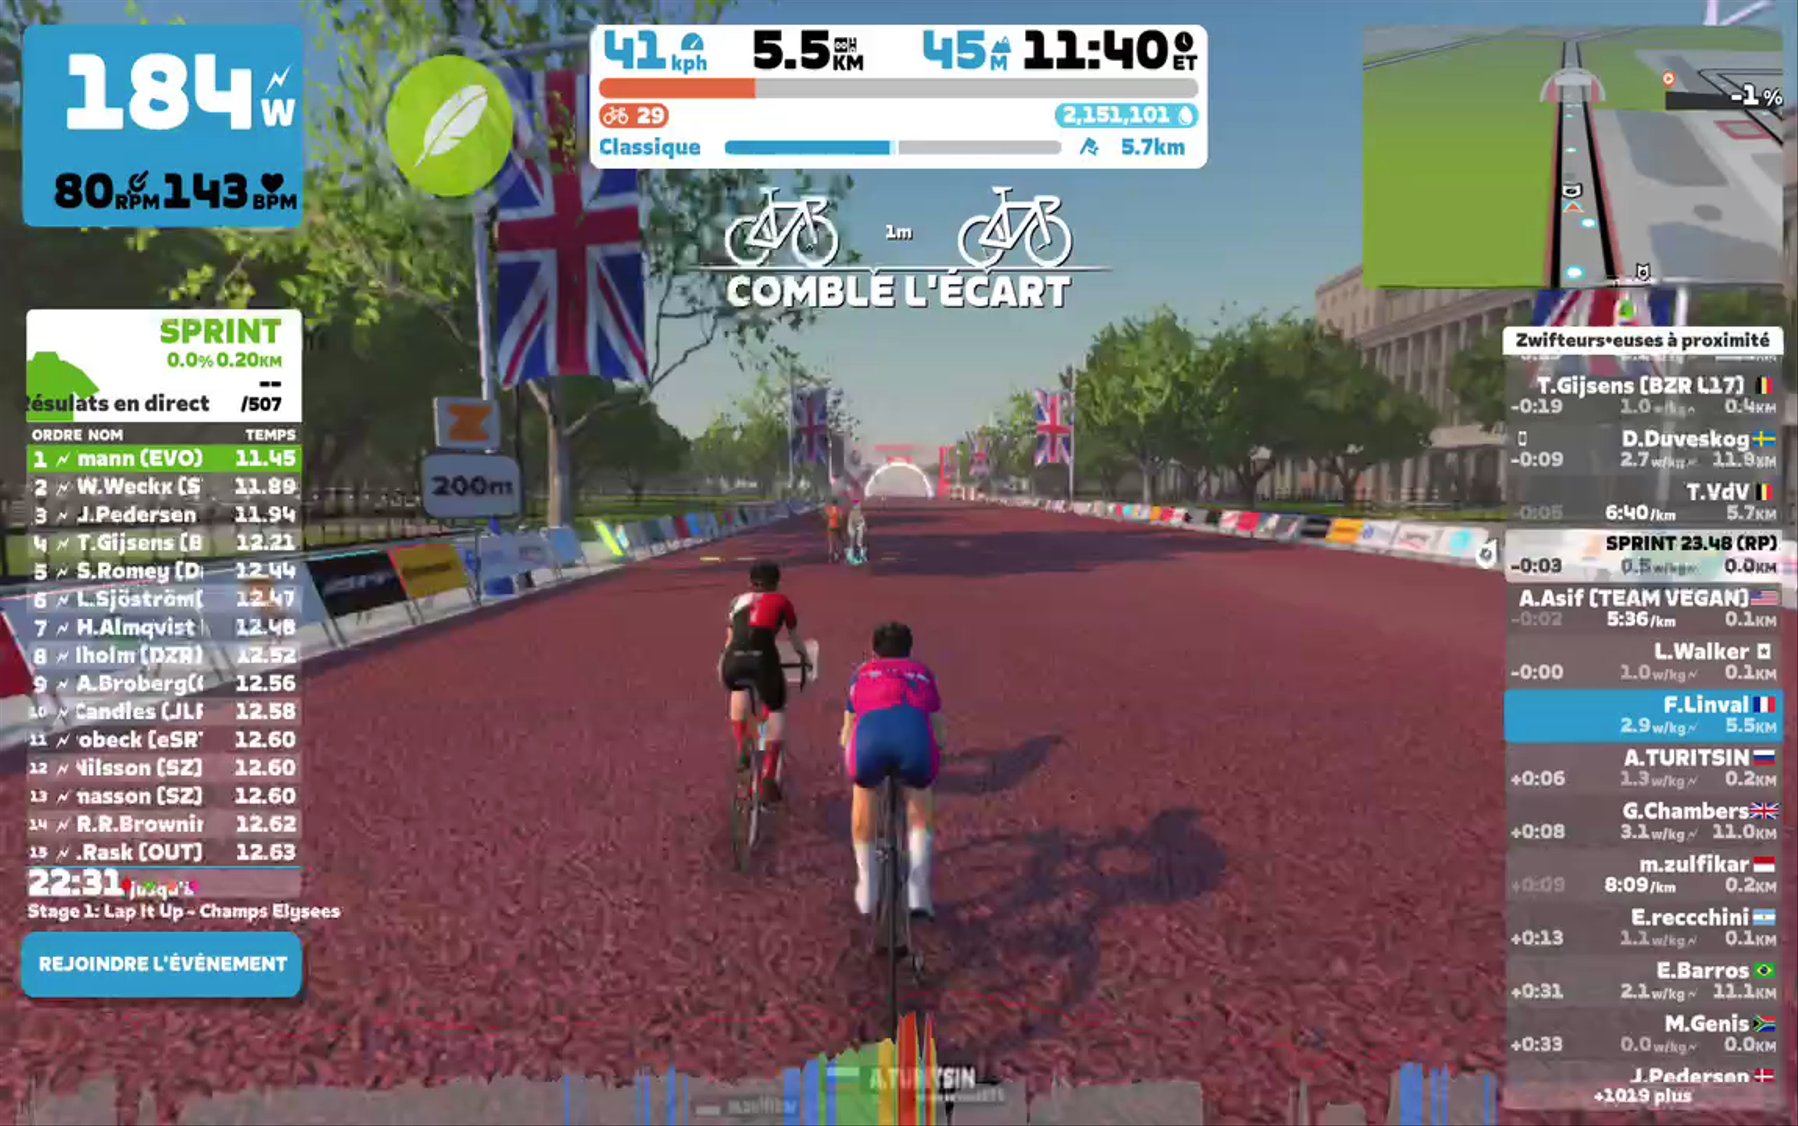 Zwift - Race: SZR After Work Party (A) on Classique in London